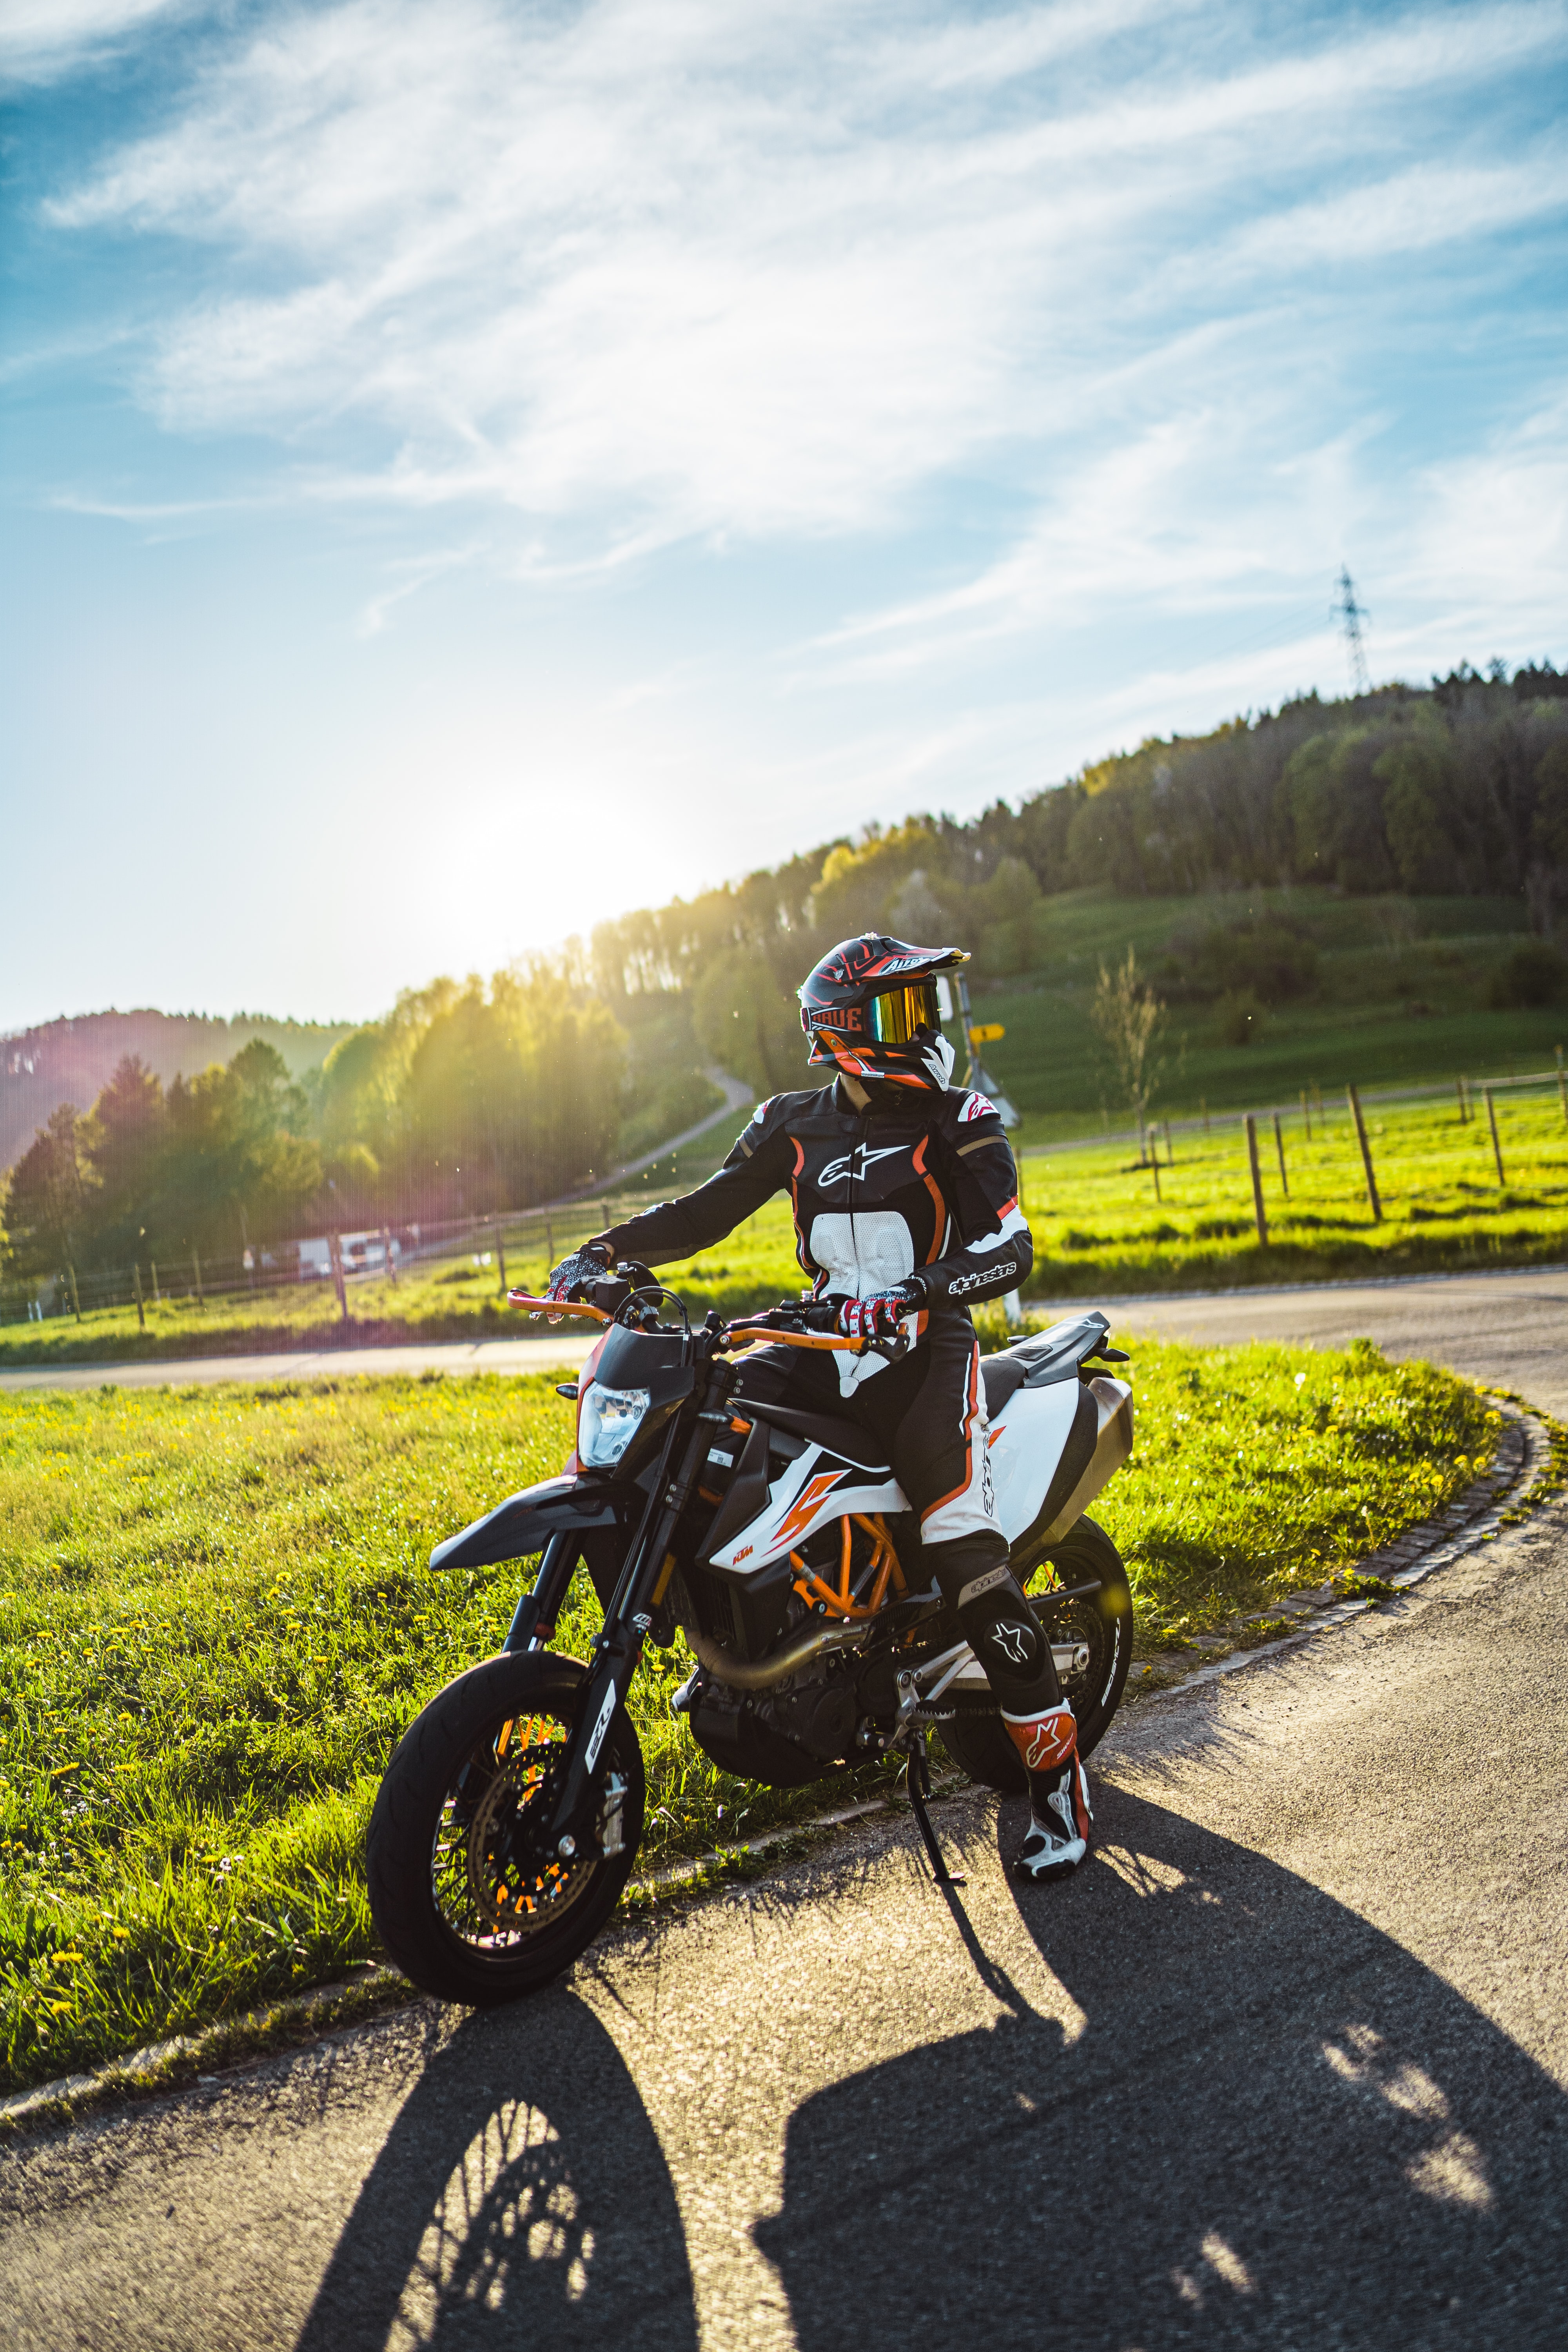 Mobile wallpaper: Ktm 200 Duke, Motorcyclist, Outfit, Motorcycle,  Motorcycles, Equipment, Ktm, Bike, 73500 download the picture for free.